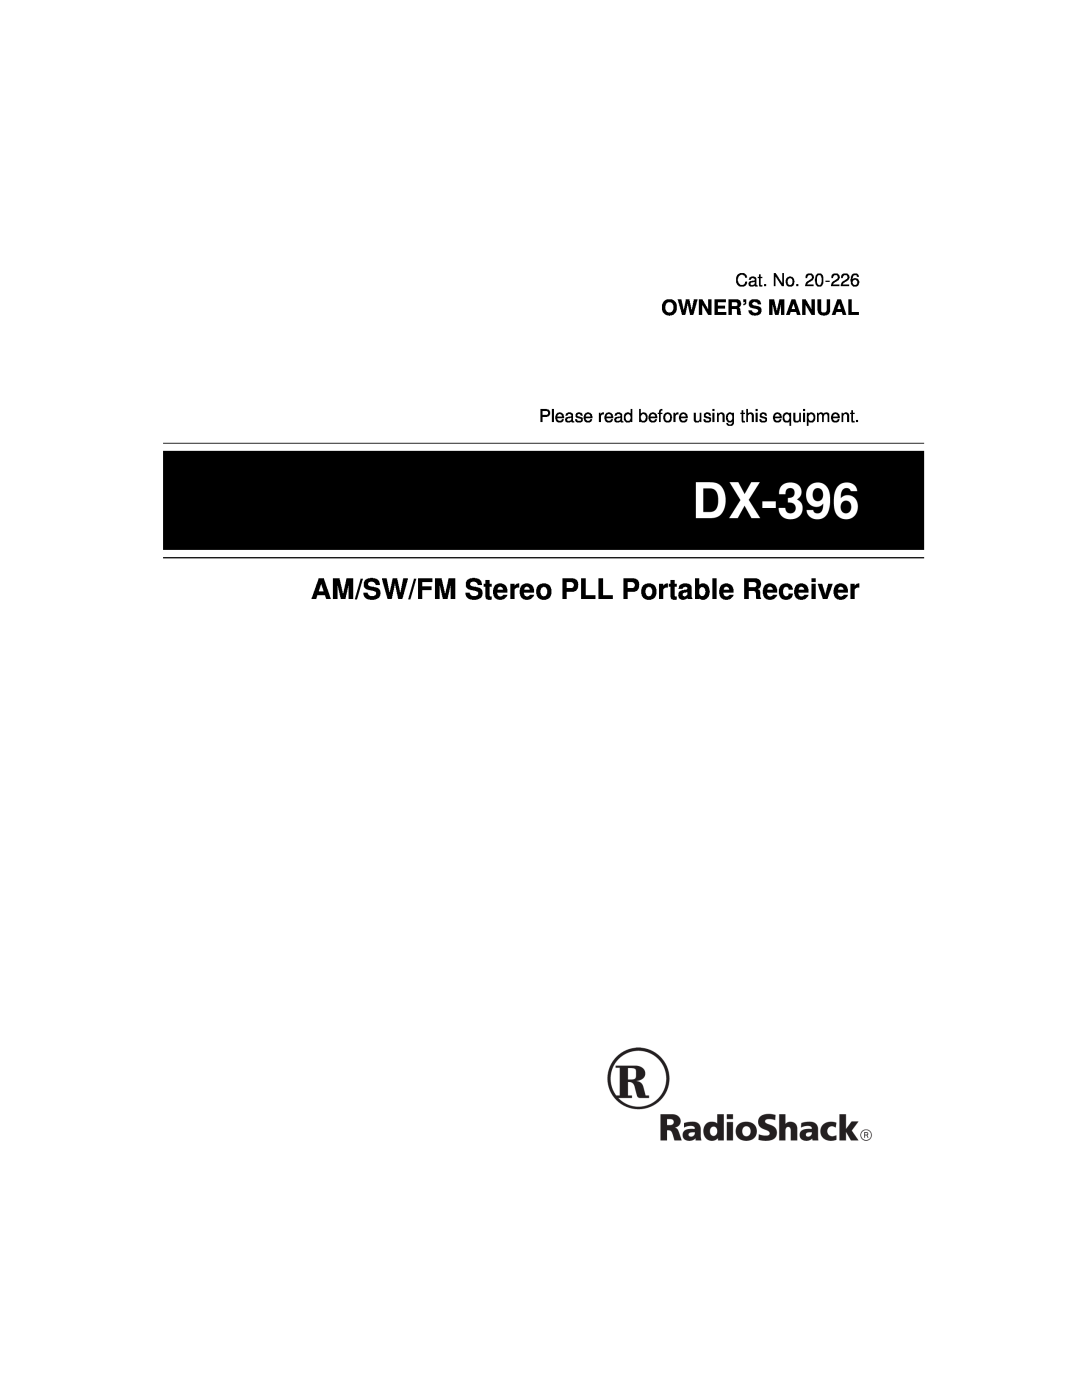 Radio Shack DX-396 owner manual AM/SW/FM Stereo PLL Portable Receiver, Owner’S Manual 